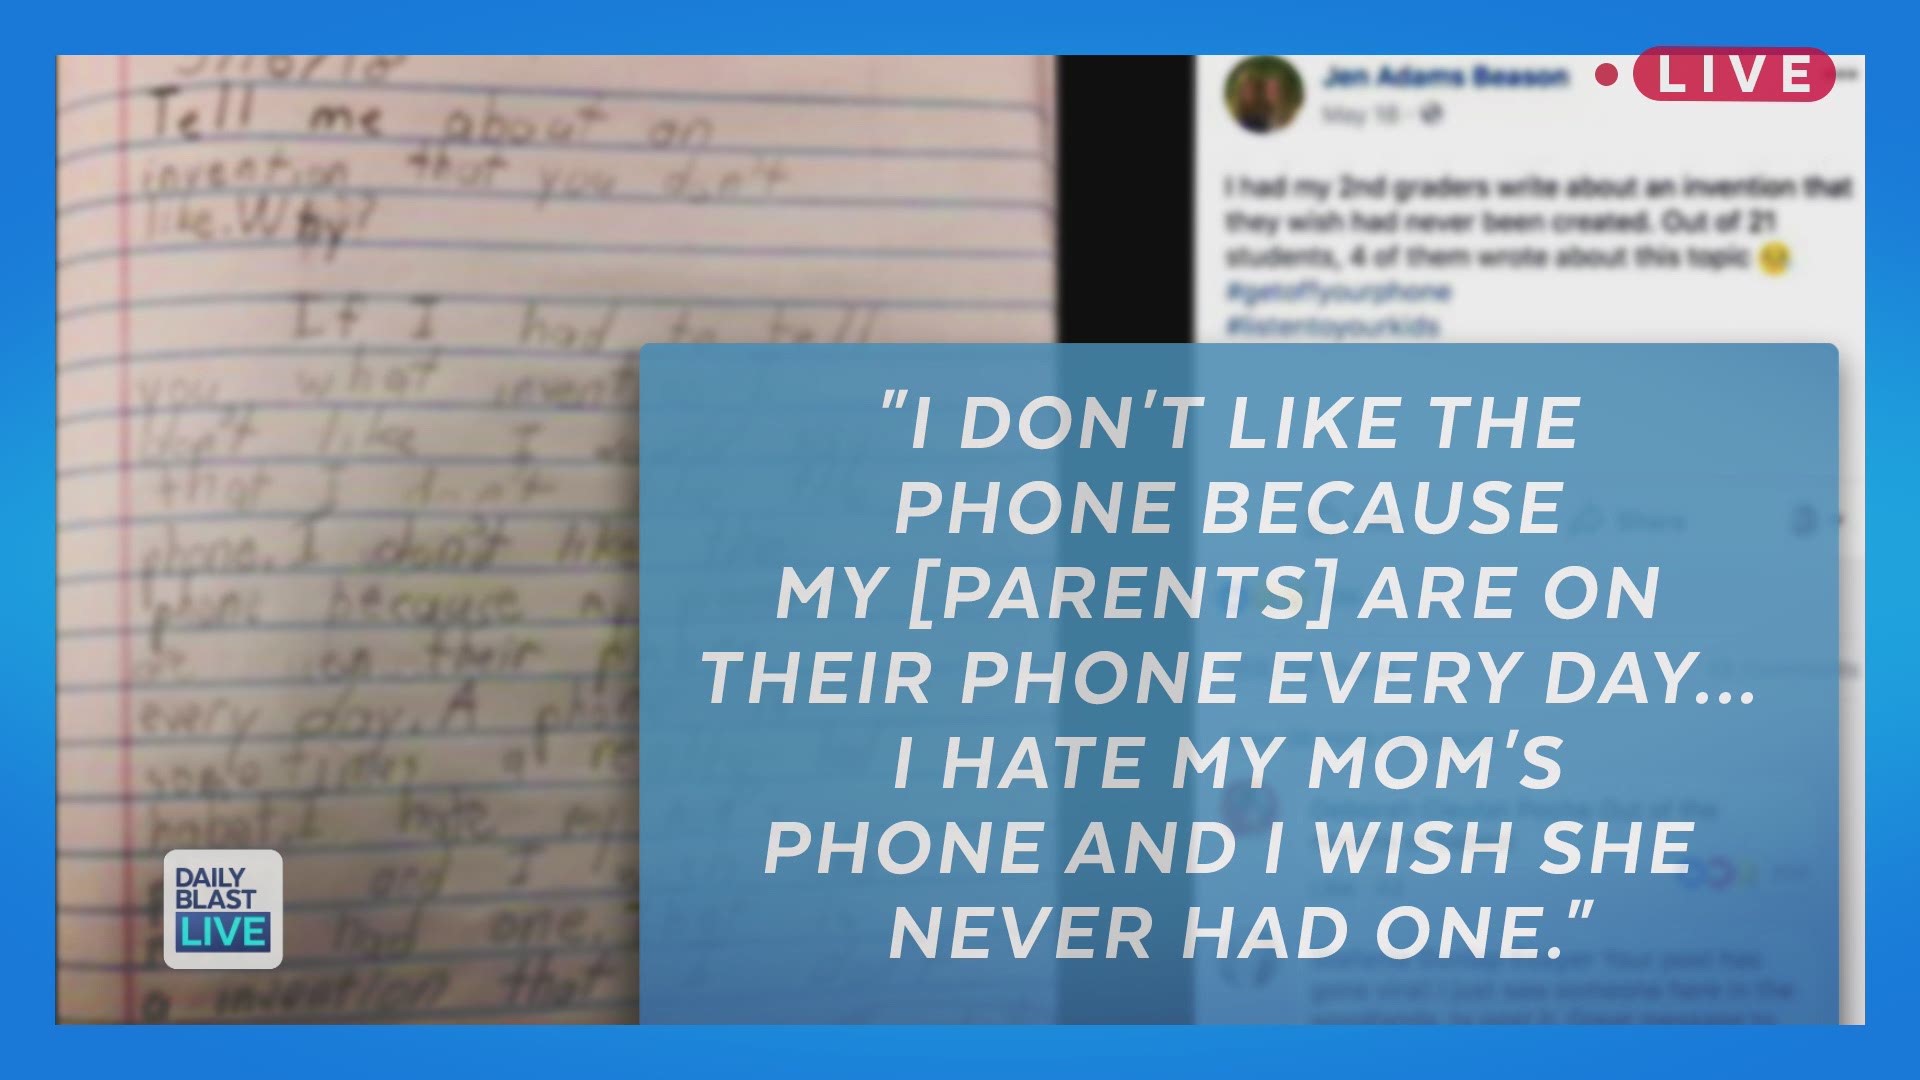 Second graders at a Louisiana school wish their parents would get off their phones. Elementary school teacher Jen Beason said four of her students wrote in an essay prompt that they wish phones were never invented. Daily Blast LIVE co-hosts discuss the in